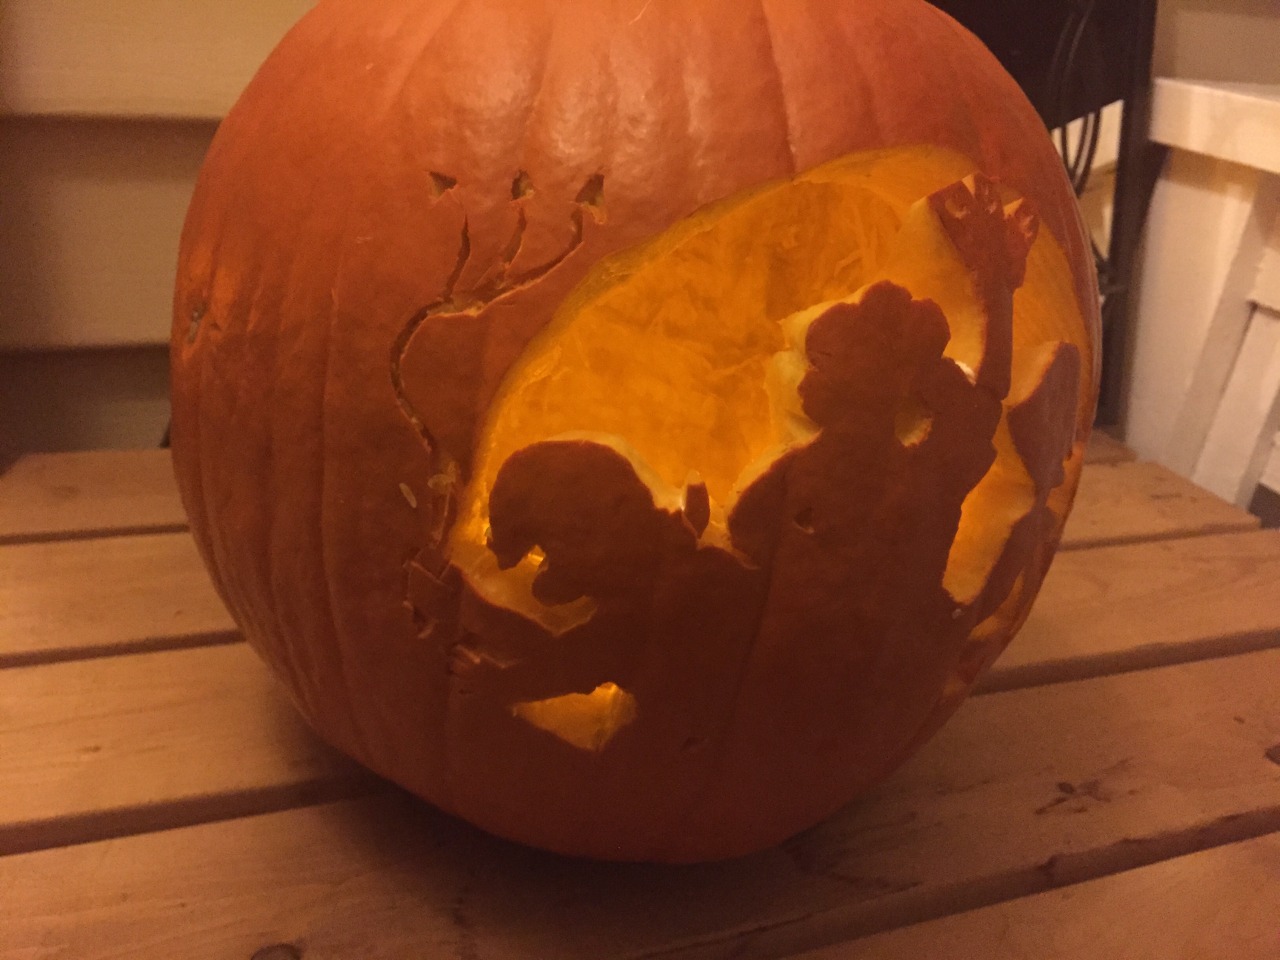 I really wanted to carve the Secret Team promo last year into a pumpkin for halloween but I didn’t get the chance. This year, of course, I made sure it happened! B)